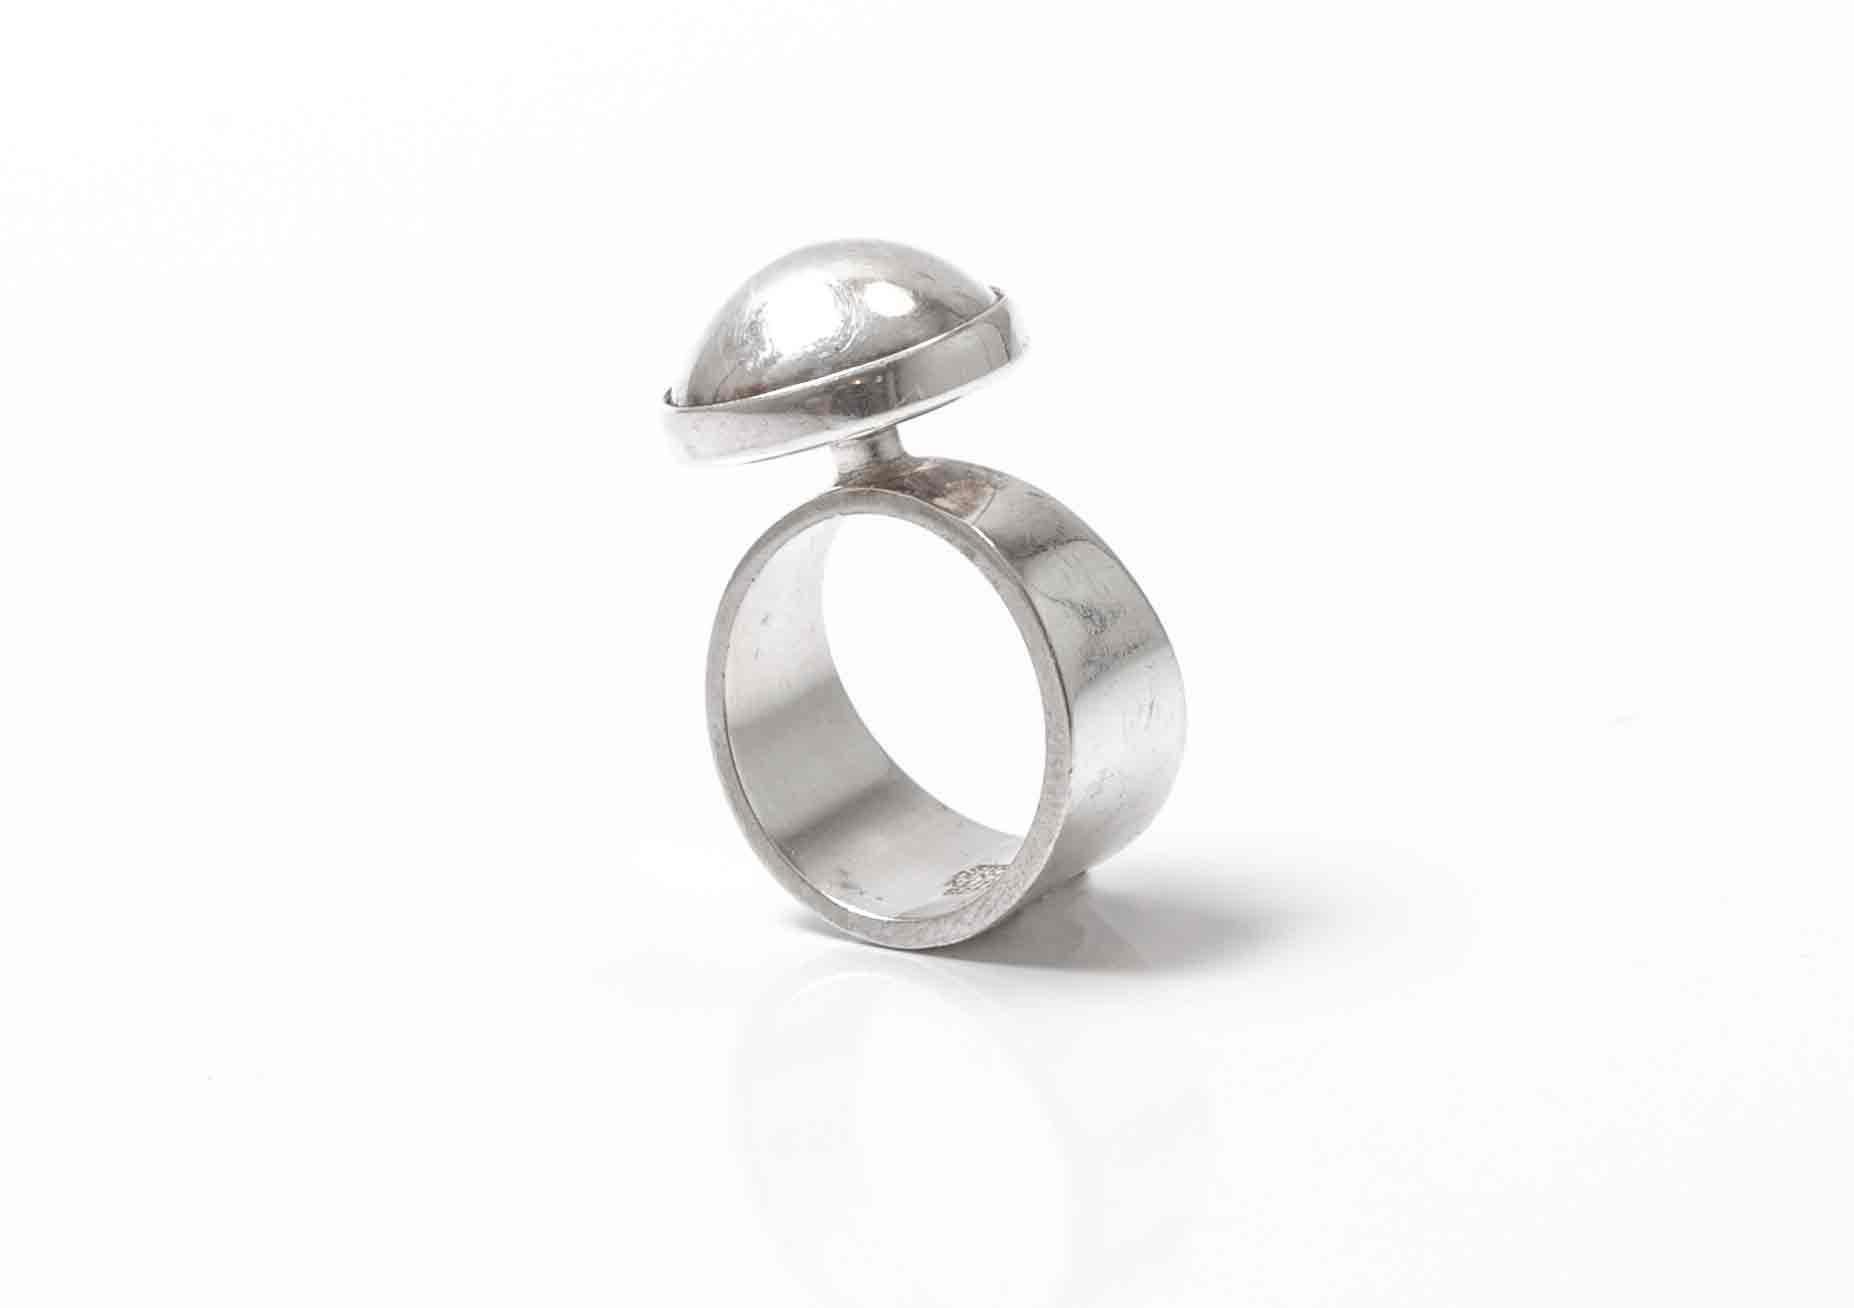 Minimalist and organic silver ring by Nils Erik From. Designed and made in Denmark from cirka 1960s second half. The ring is in excellent vintage condition. 

The ring size is 55 (m)